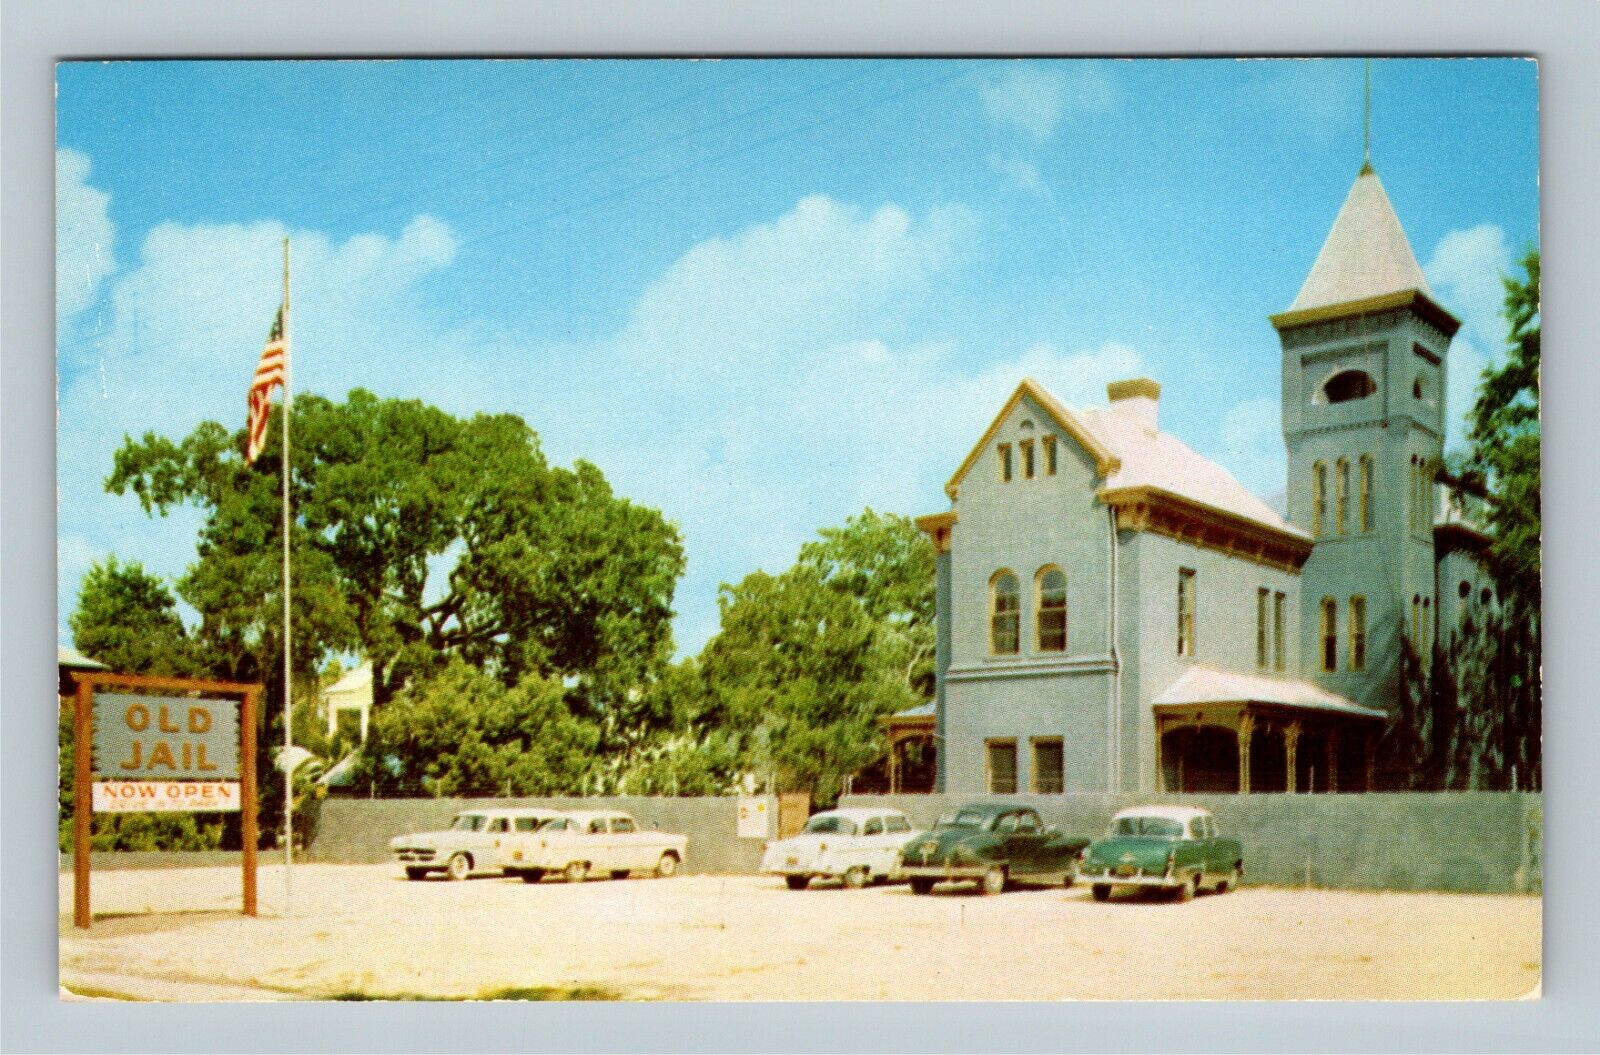 St. Augustine, Old Jail Museum Bell Tower, Classic Cars Vintage Florida Postcard